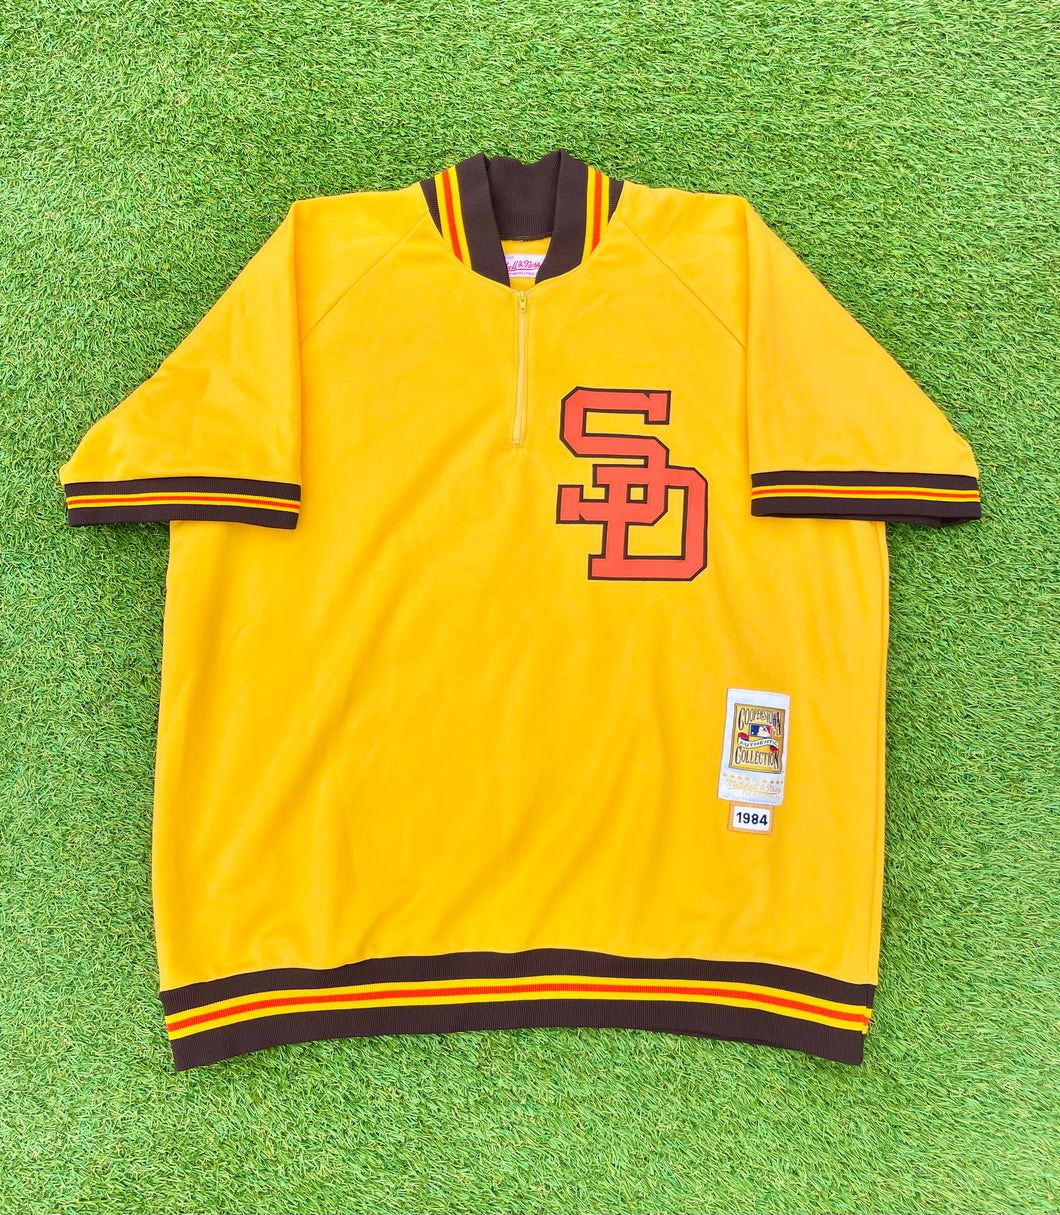 Tony Gwynn San Diego Padres 1984 Cooperstown Collection Mitchell & Nes –  Vino Club Vintage